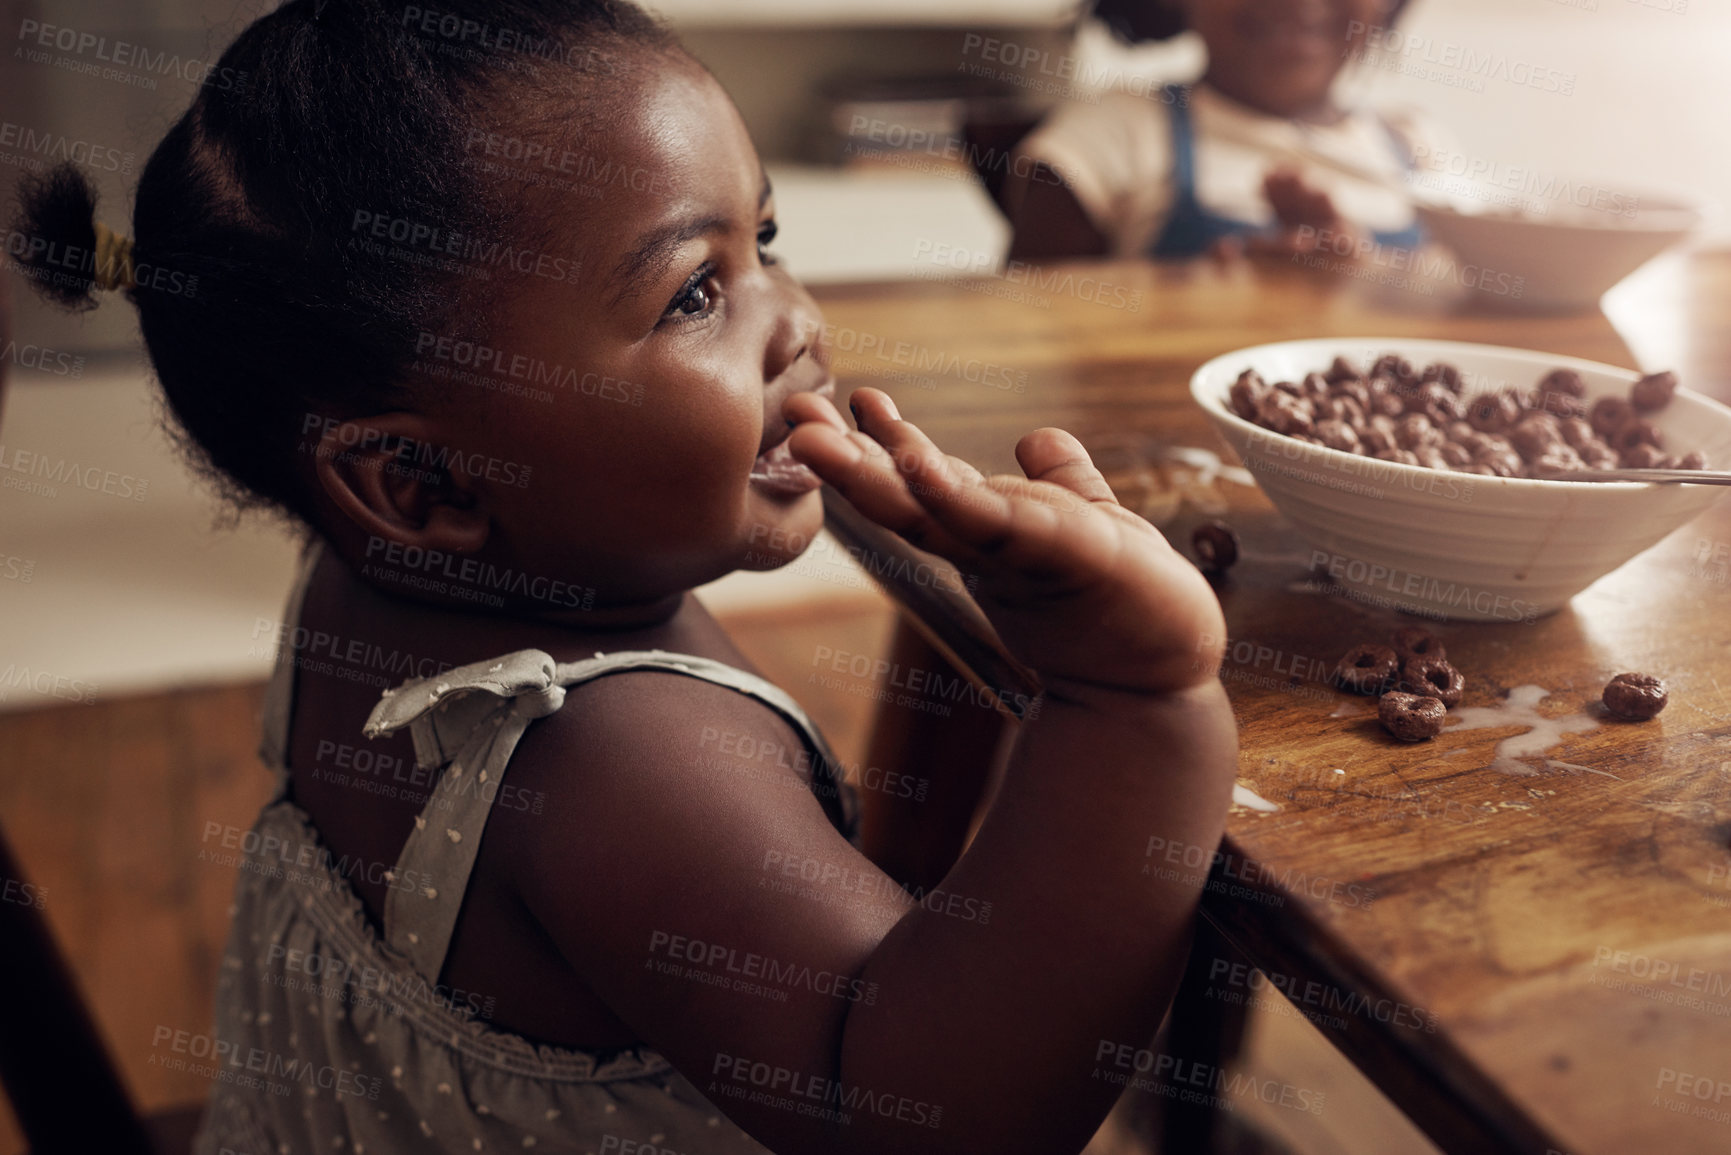 Buy stock photo Cropped shot of an adorable baby girl eating cereal at home with her elder sister in the background